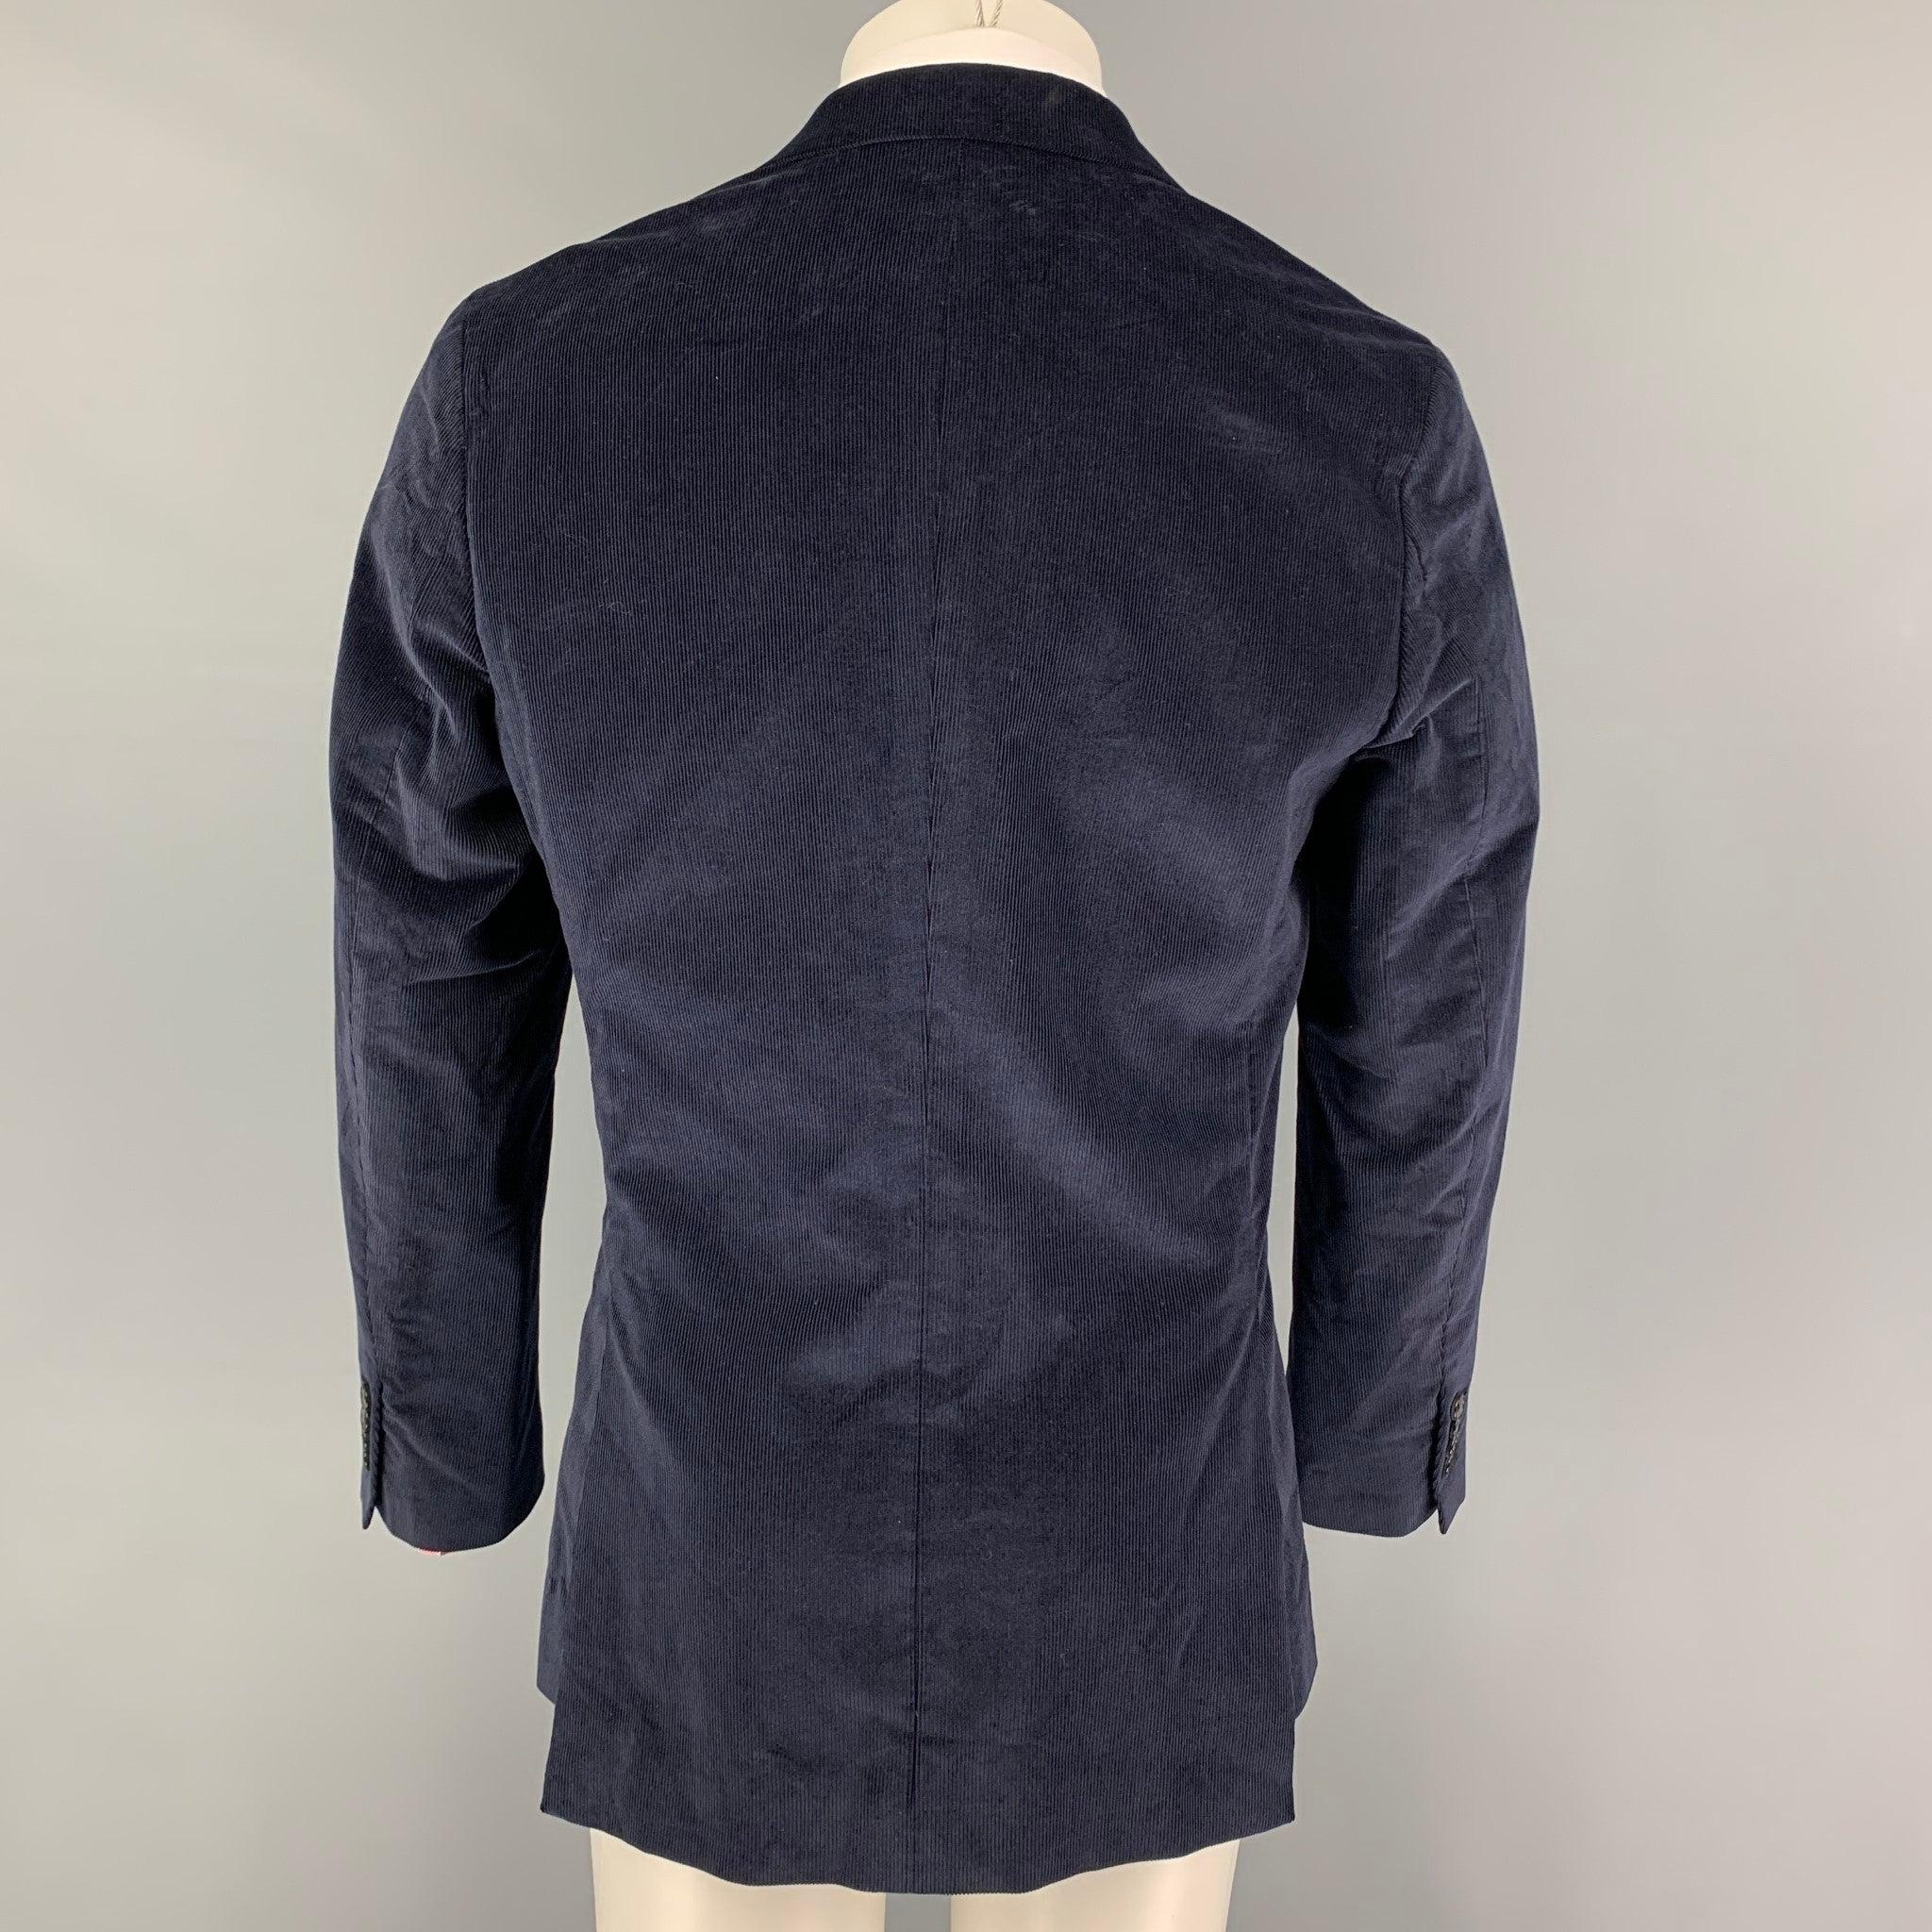 PAUL SMITH Size 38 Navy Corduroy Cotton Notch Lapel Sport Coat In Excellent Condition For Sale In San Francisco, CA